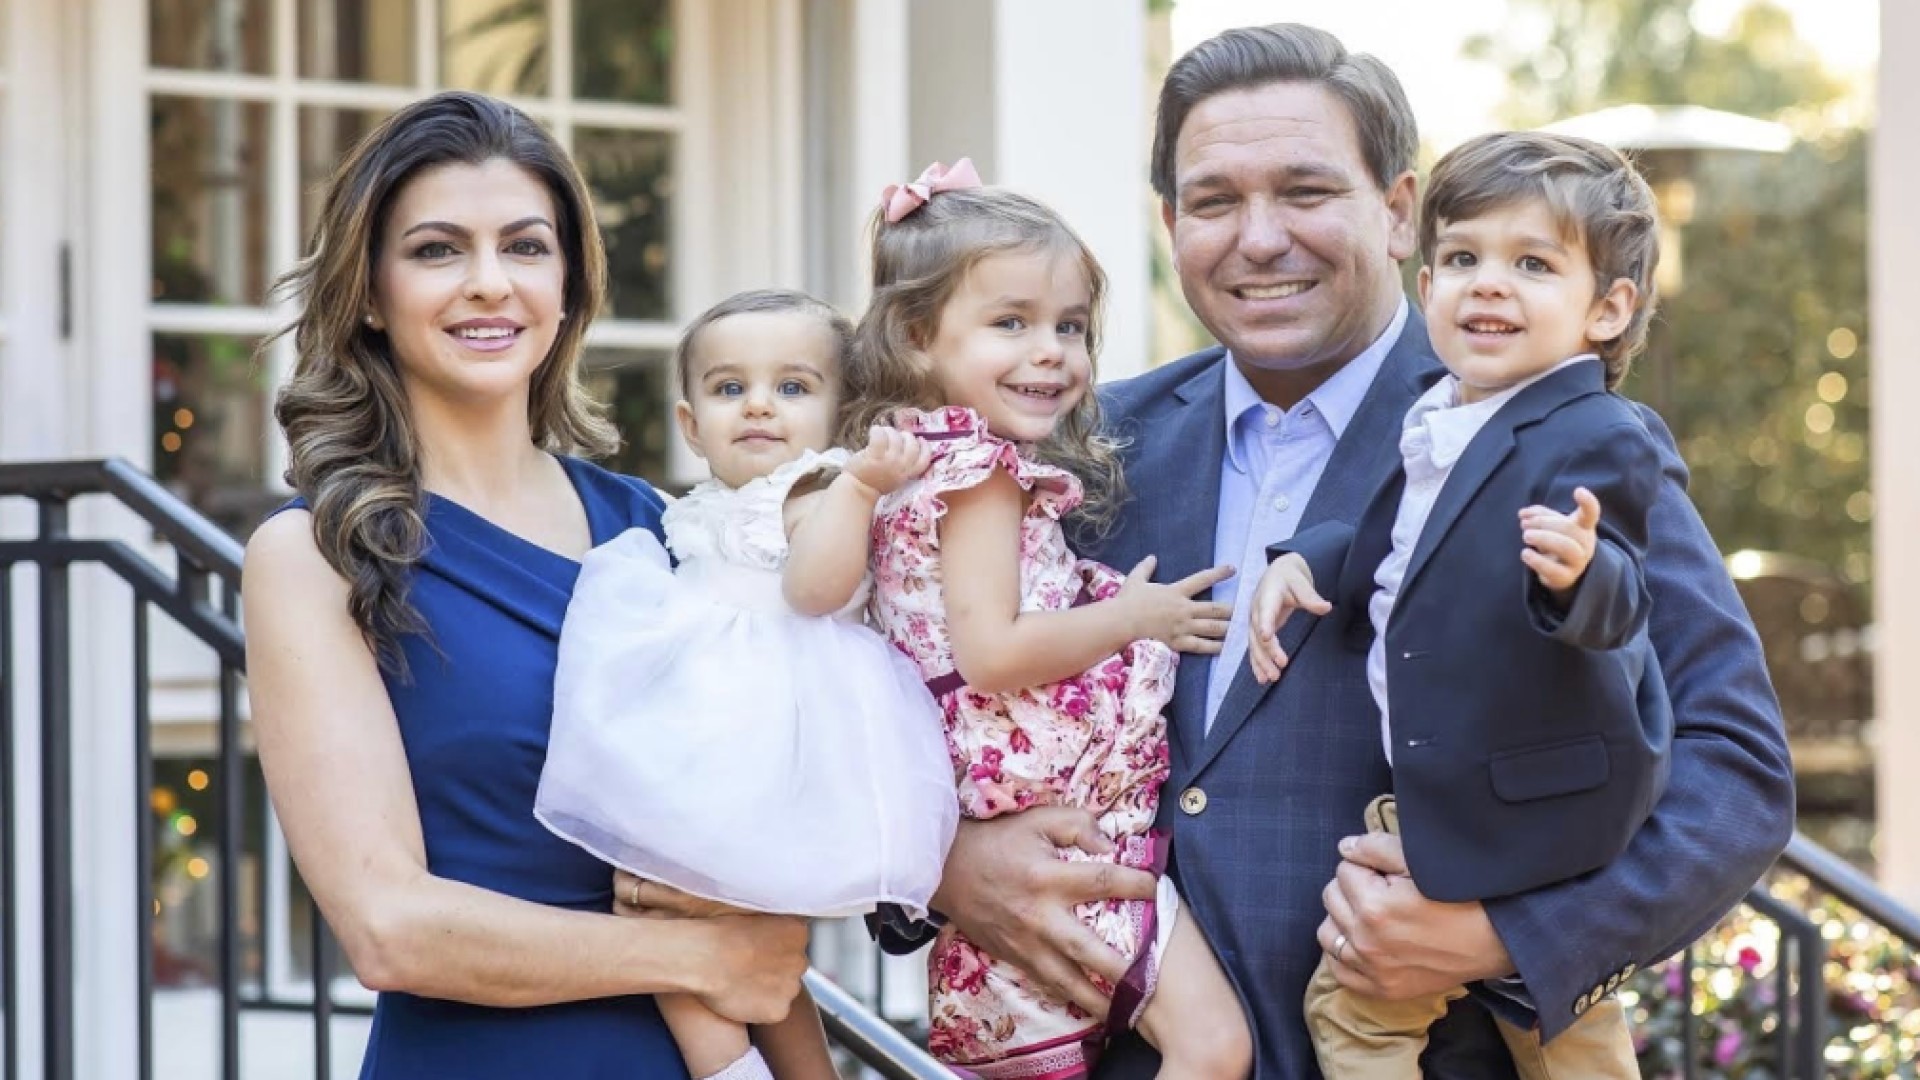 Ron DeSantis exposes trans surgeries for children as "mastectomies" and "castration" (& other stories)